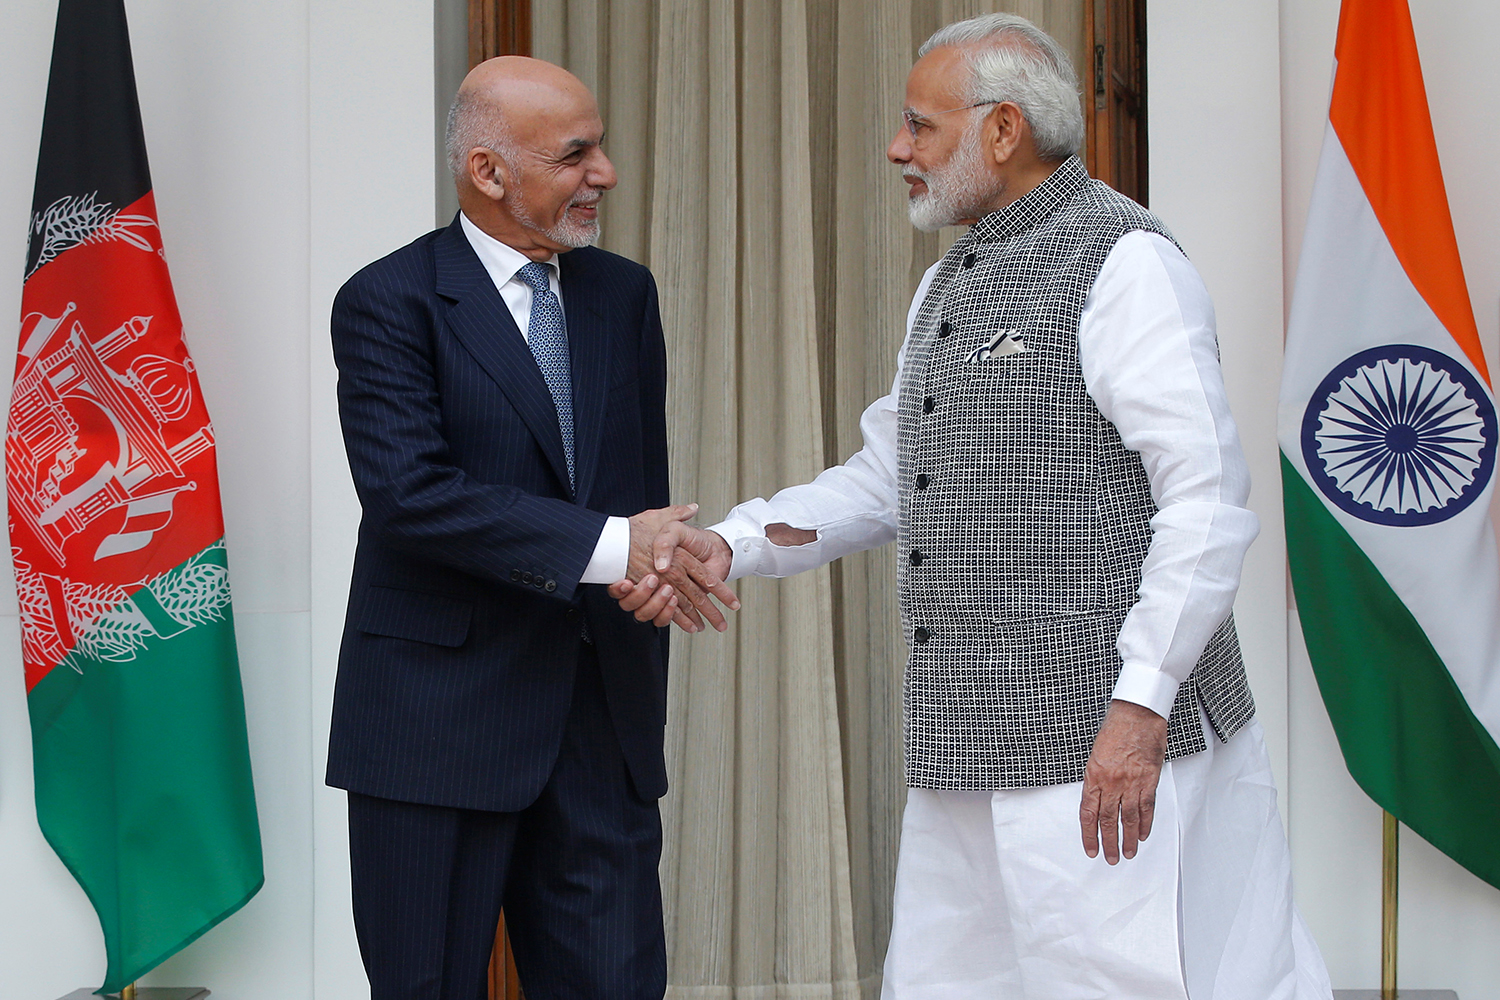 Will India amend its approach to Afghanistan peace? Atlantic Council